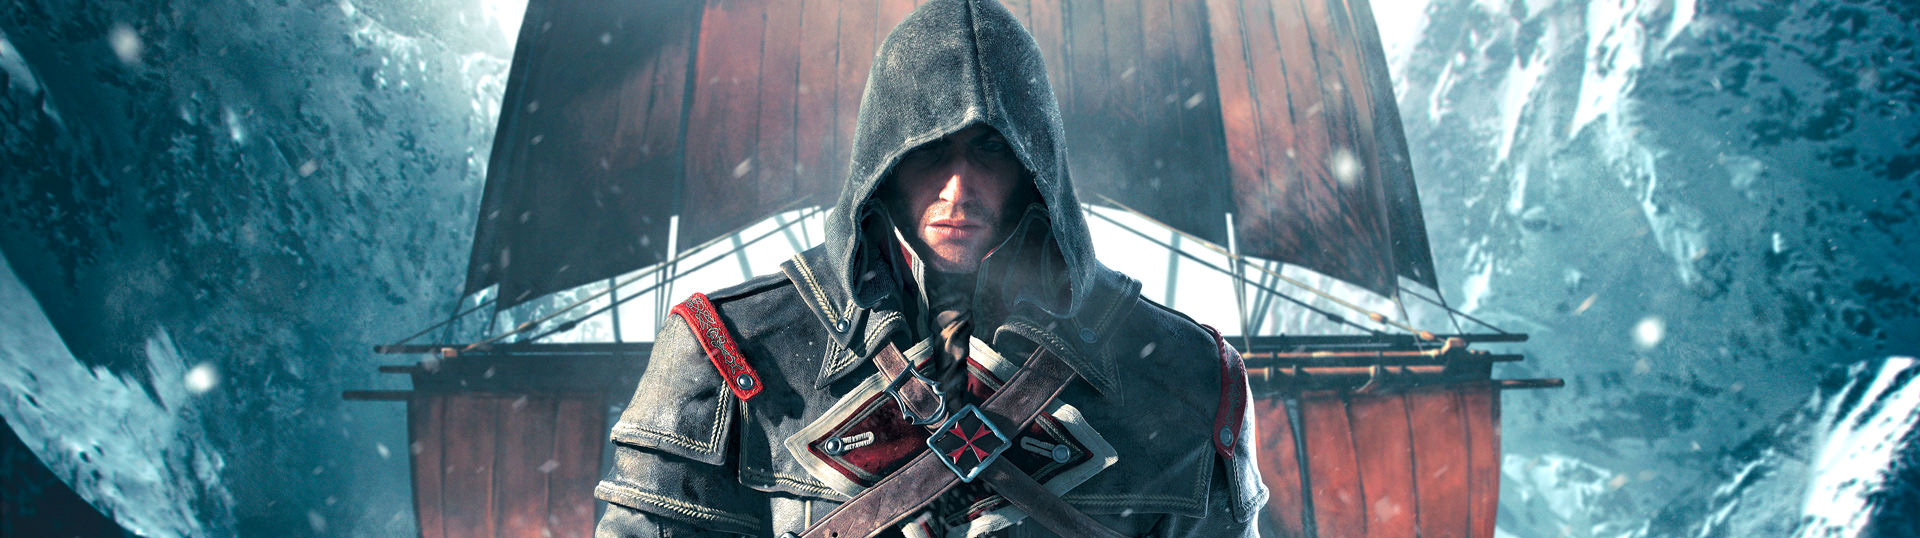 Assassin S Creed Rogue Digital Deluxe Edition